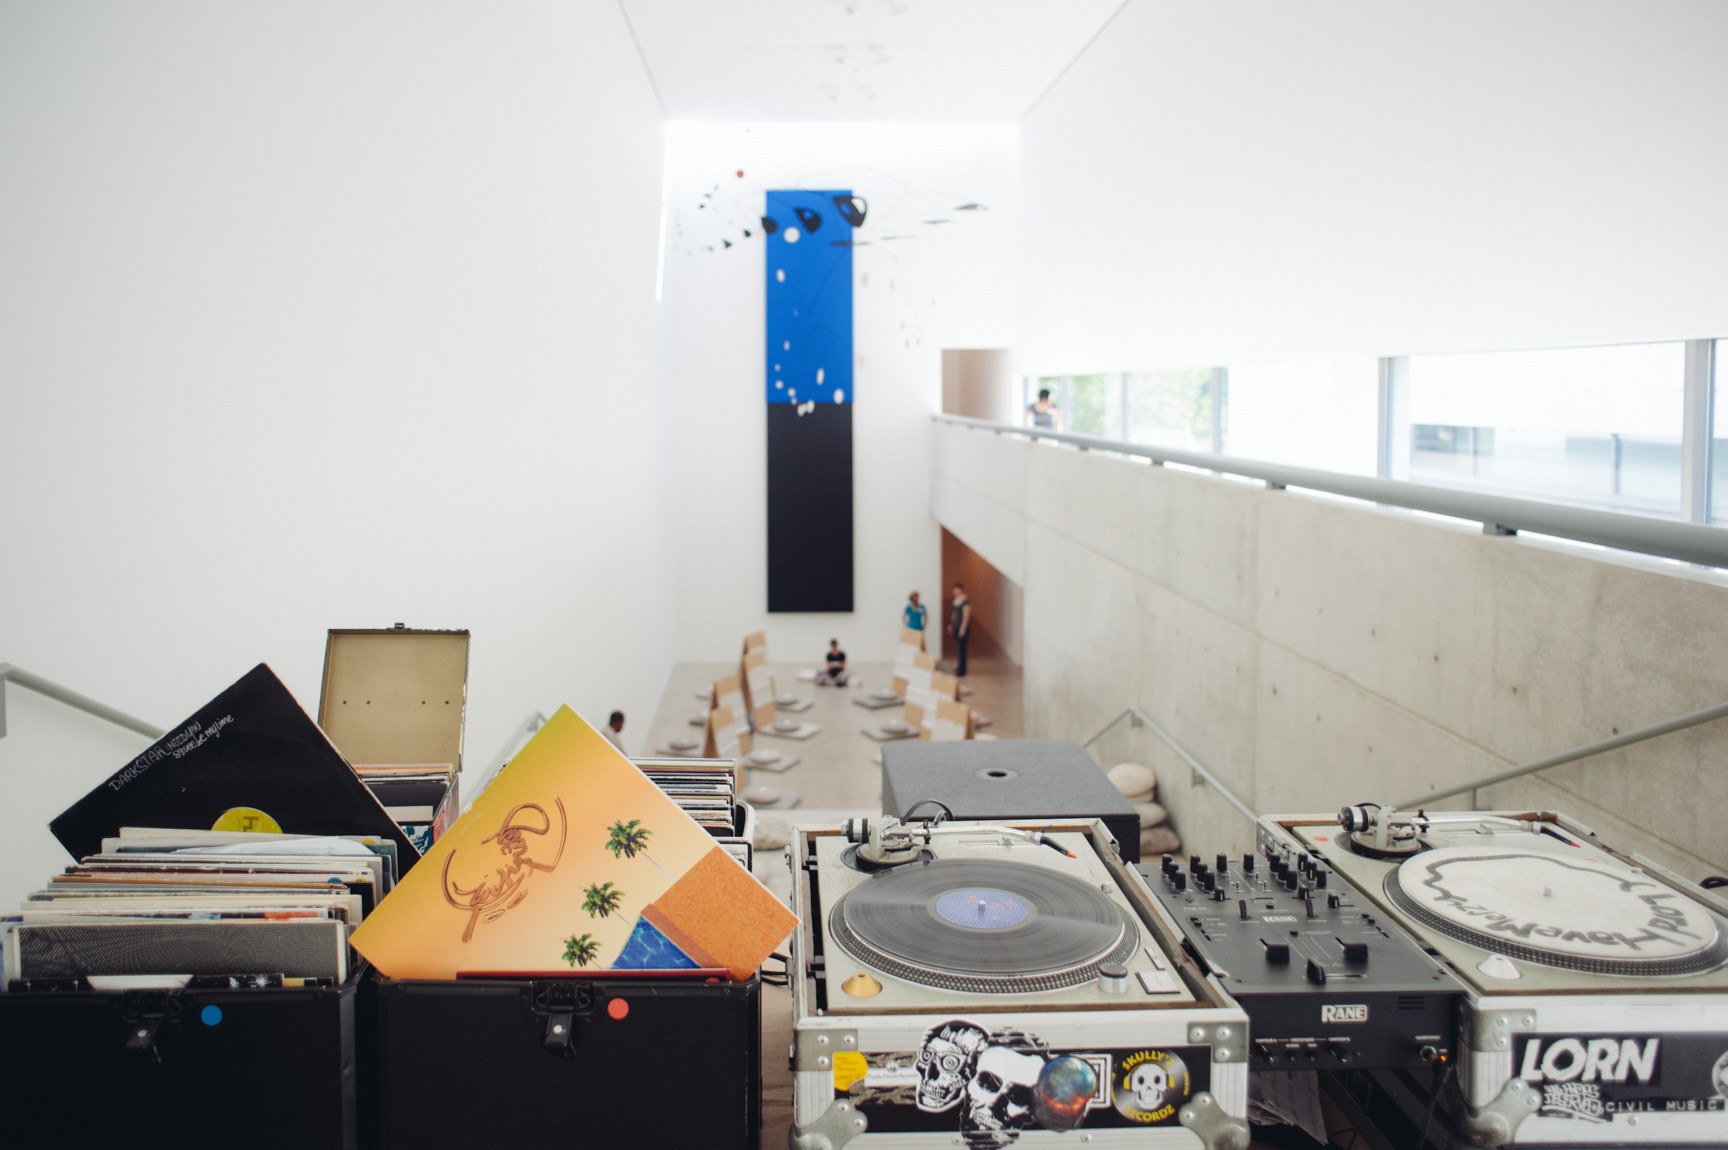 A view of the DJ's record collection and turntables facing Malchionno's meditation session in front of "Blue Black" by Ellsworth Kelly.